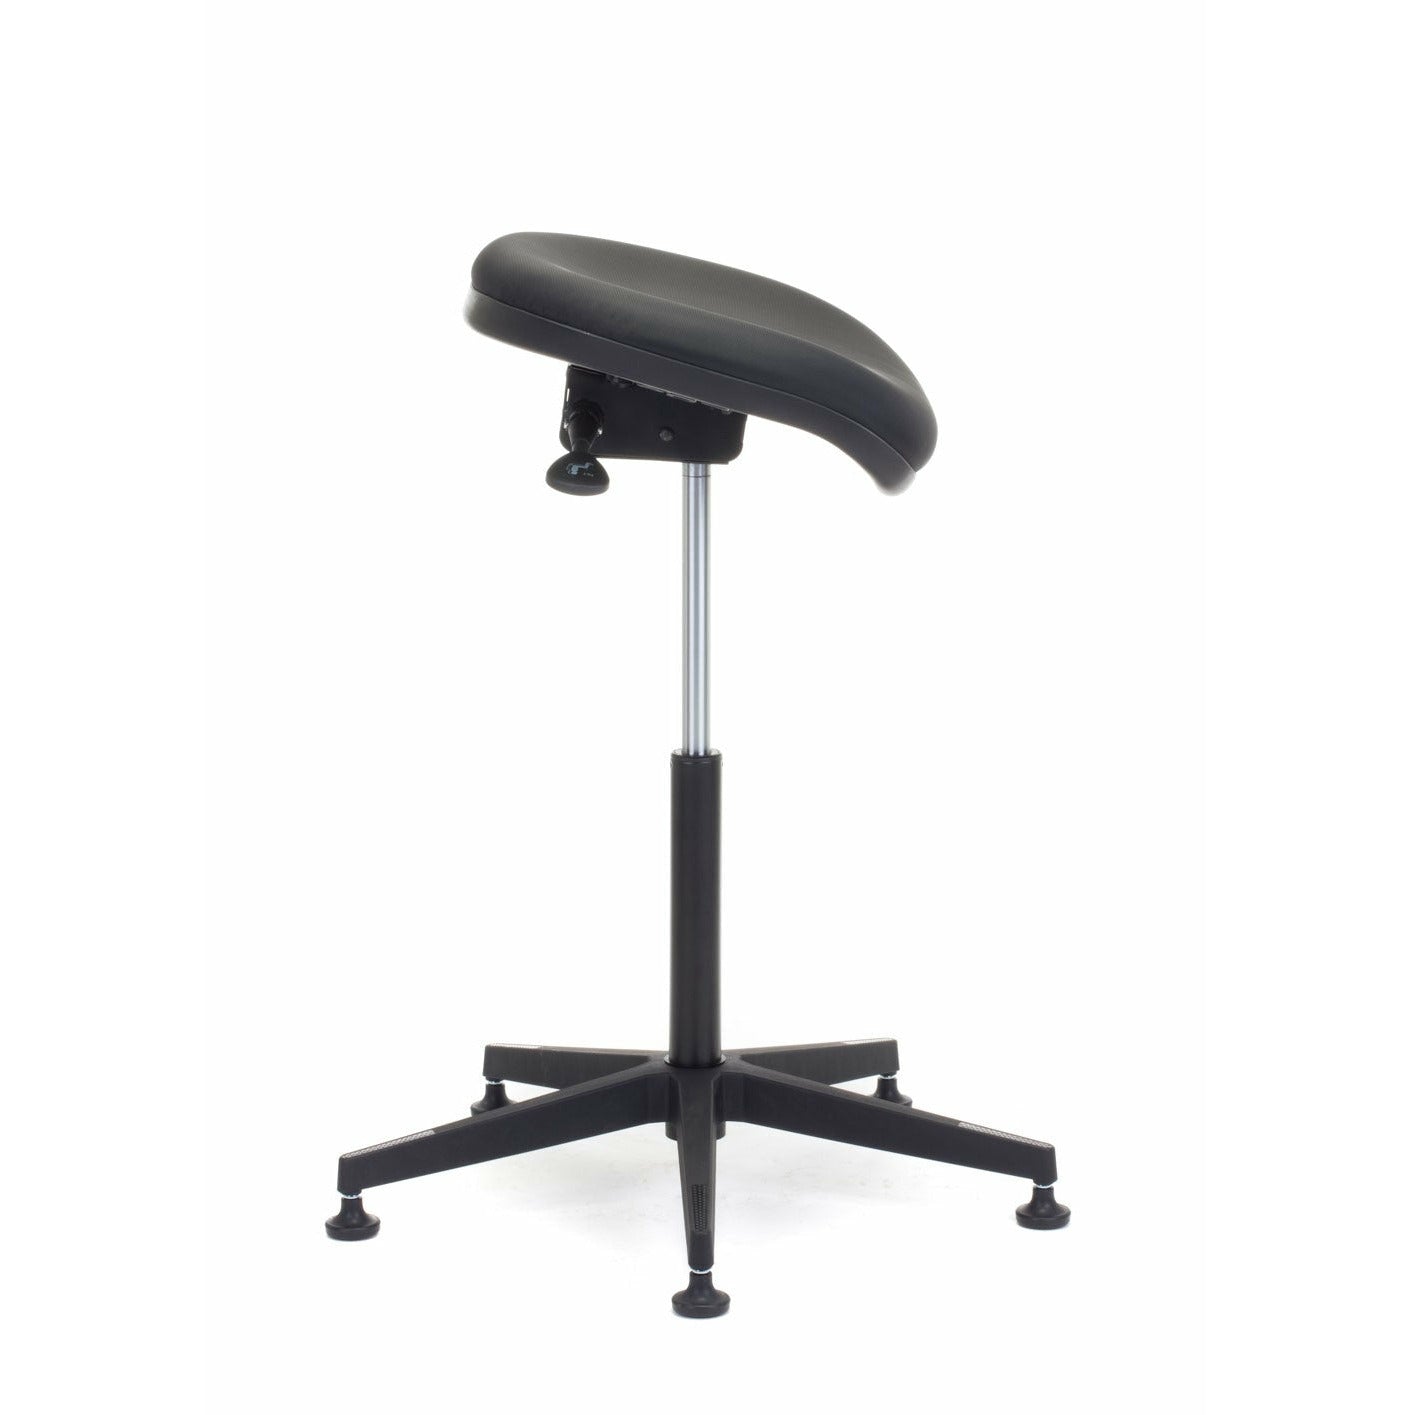 Perching Stool with Grip-Tech